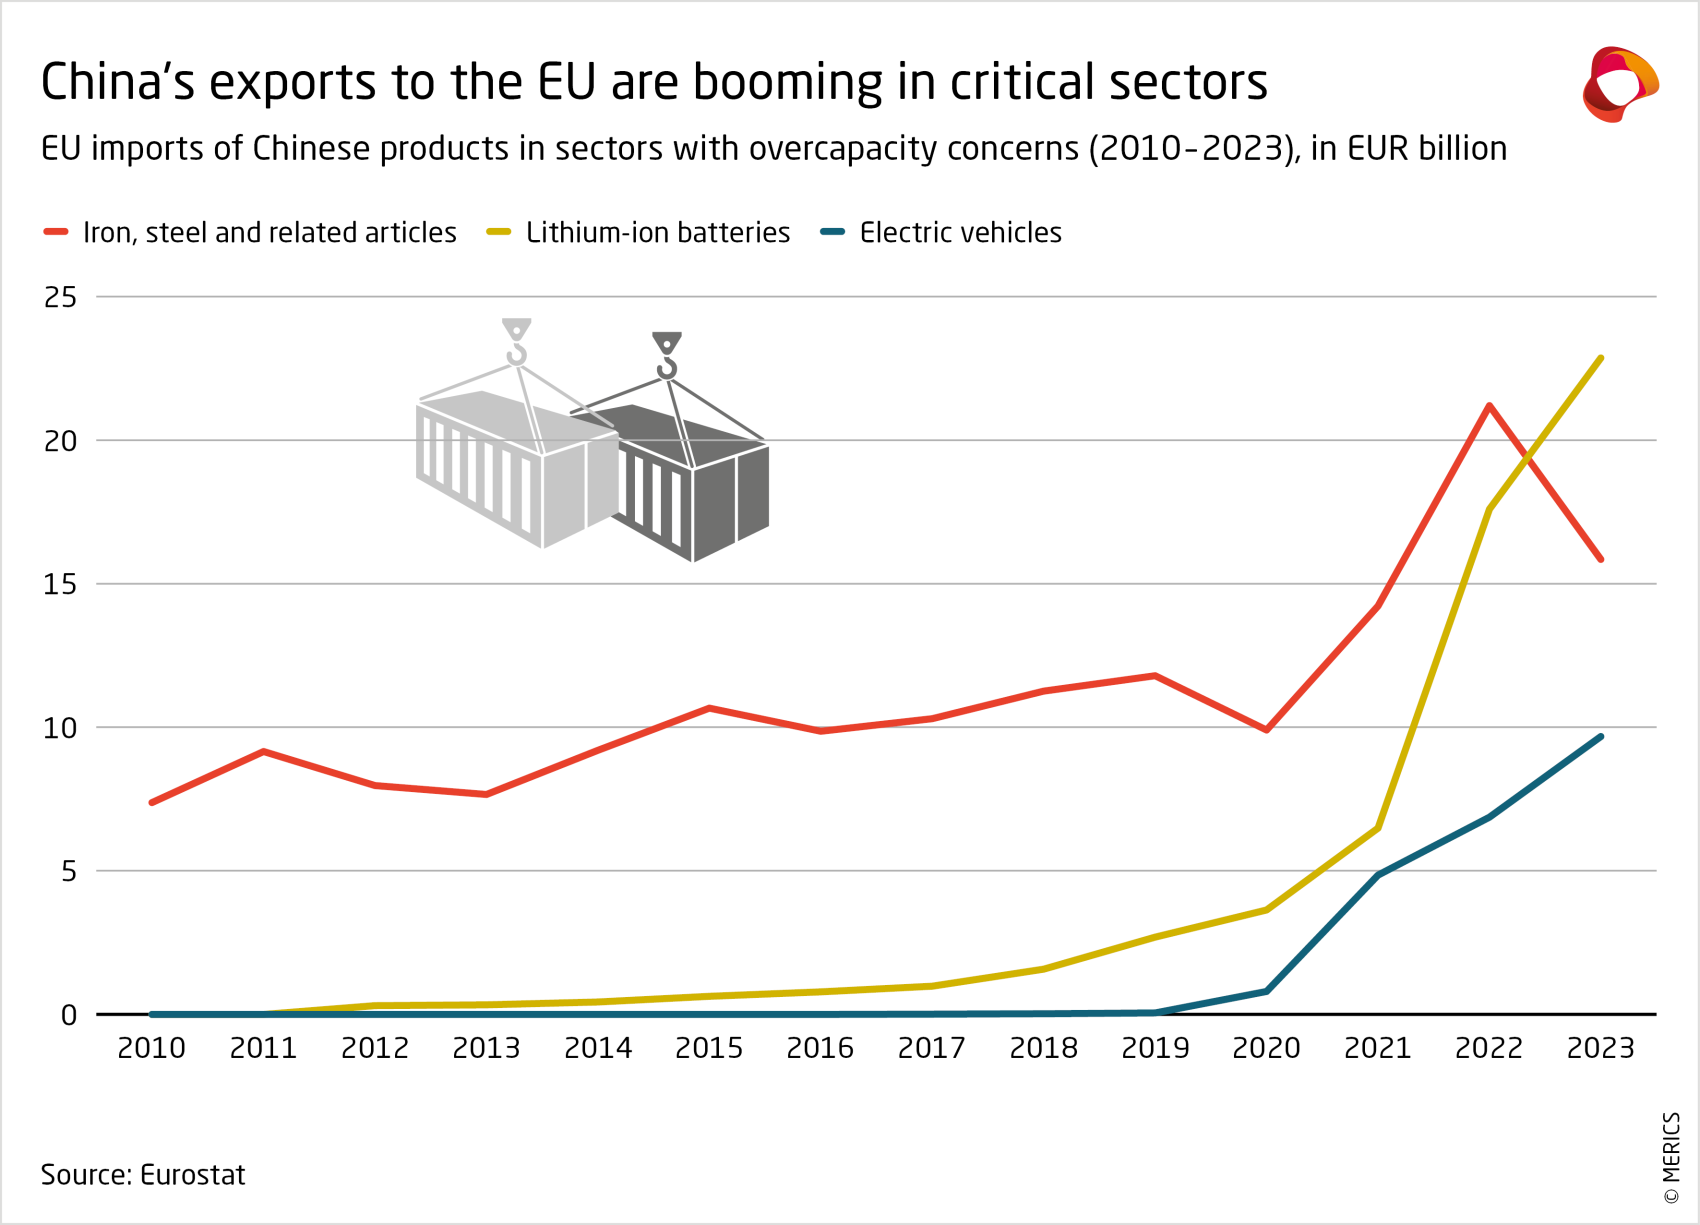 merics-china-security-risk-tracker-chinas-exports-to-the-eu-are-booming-in-critical-sectors-2010-until-2023.png